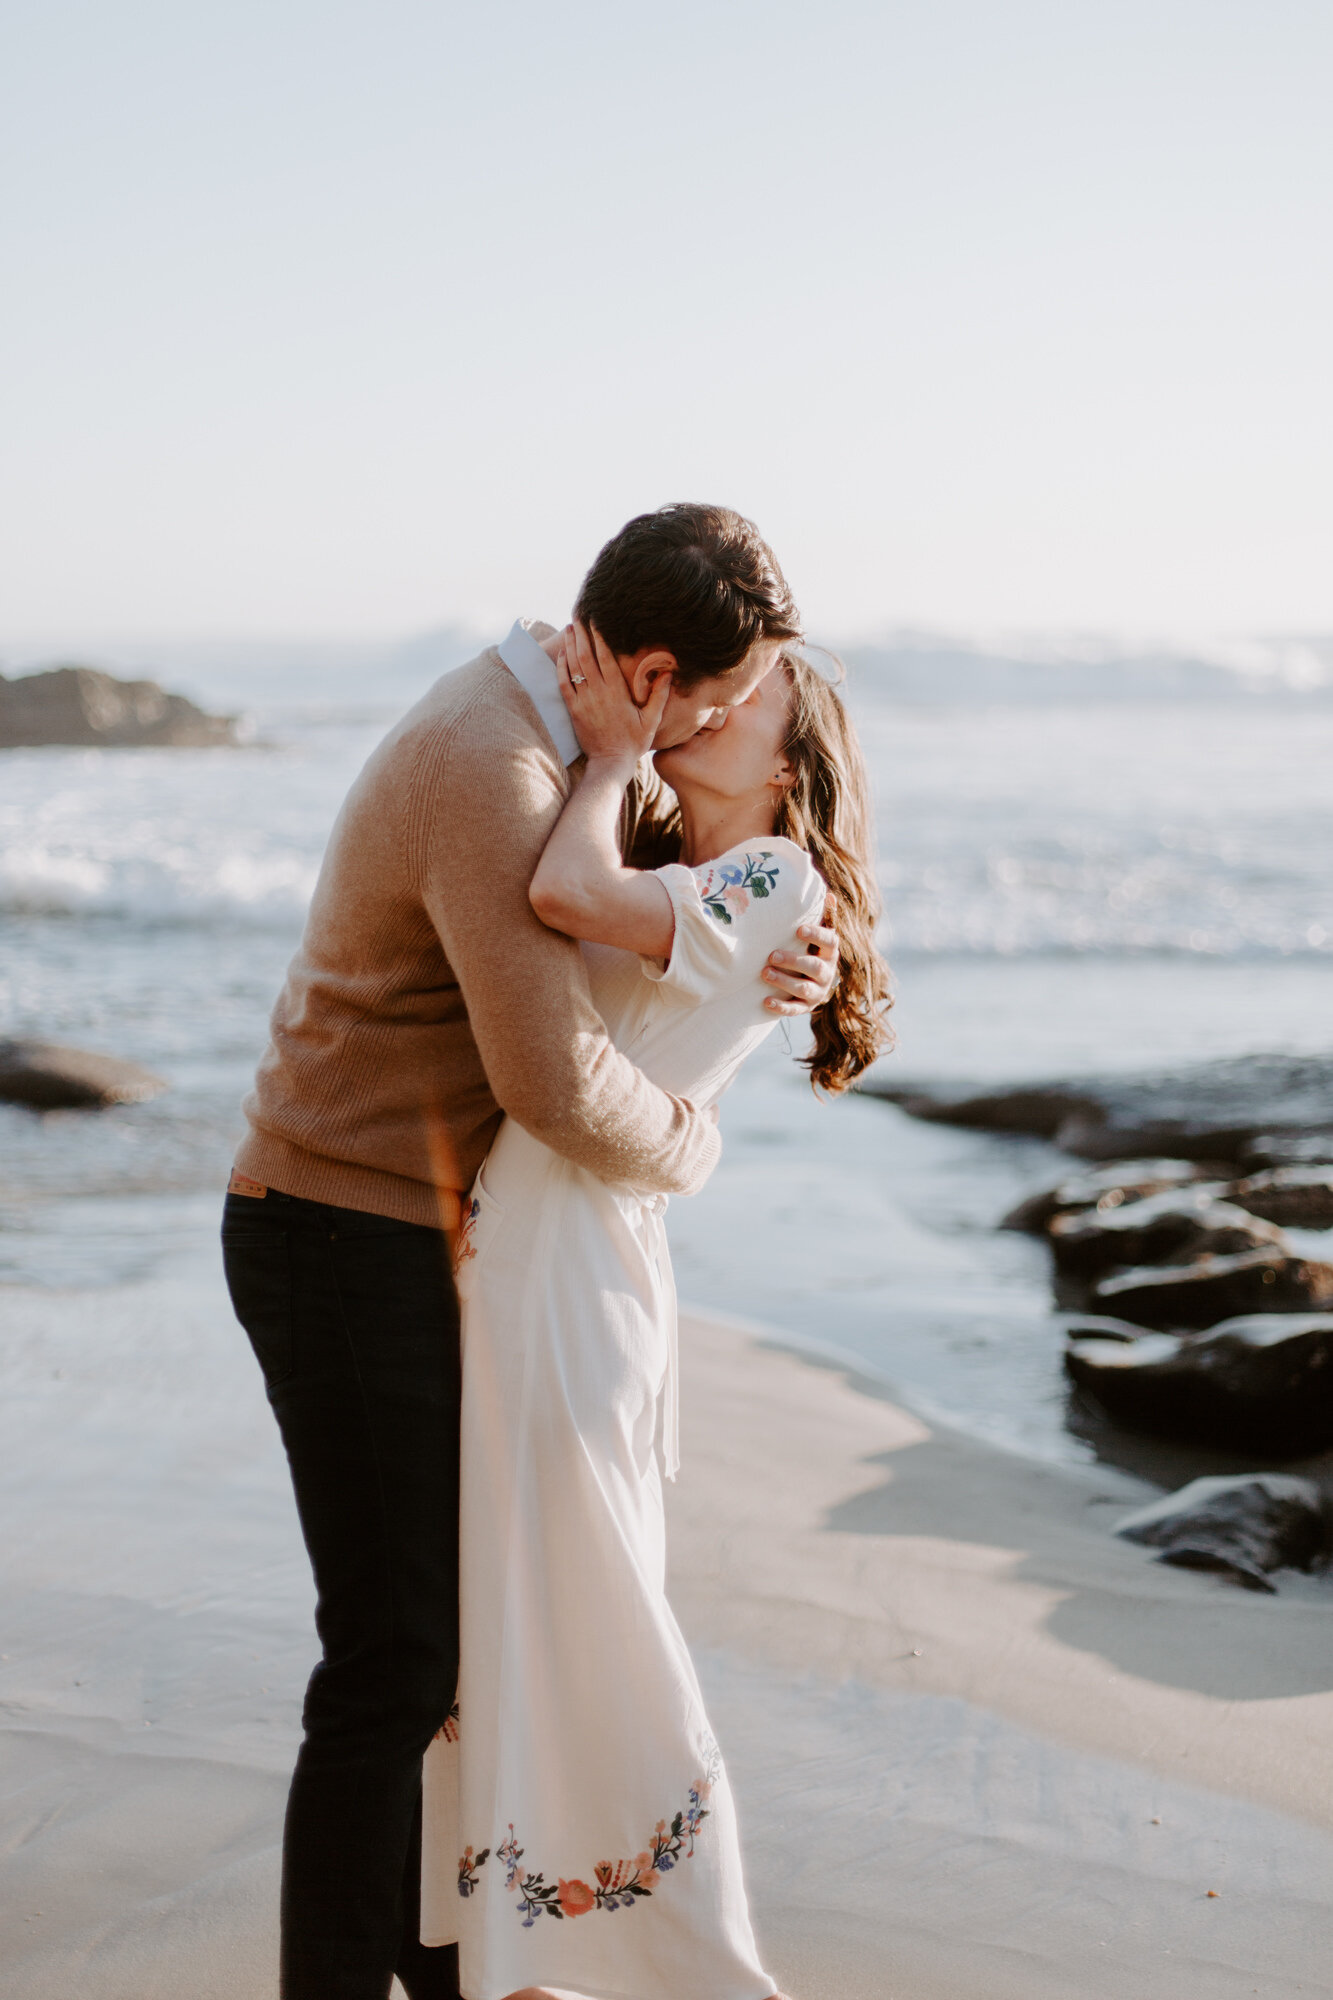 La Jolla Engagement Photos in San Diego with beach cliff and tide pools and on the sand.  Wore a white floral dress and took their engagement photos for their wedding by Kara Reynolds photography